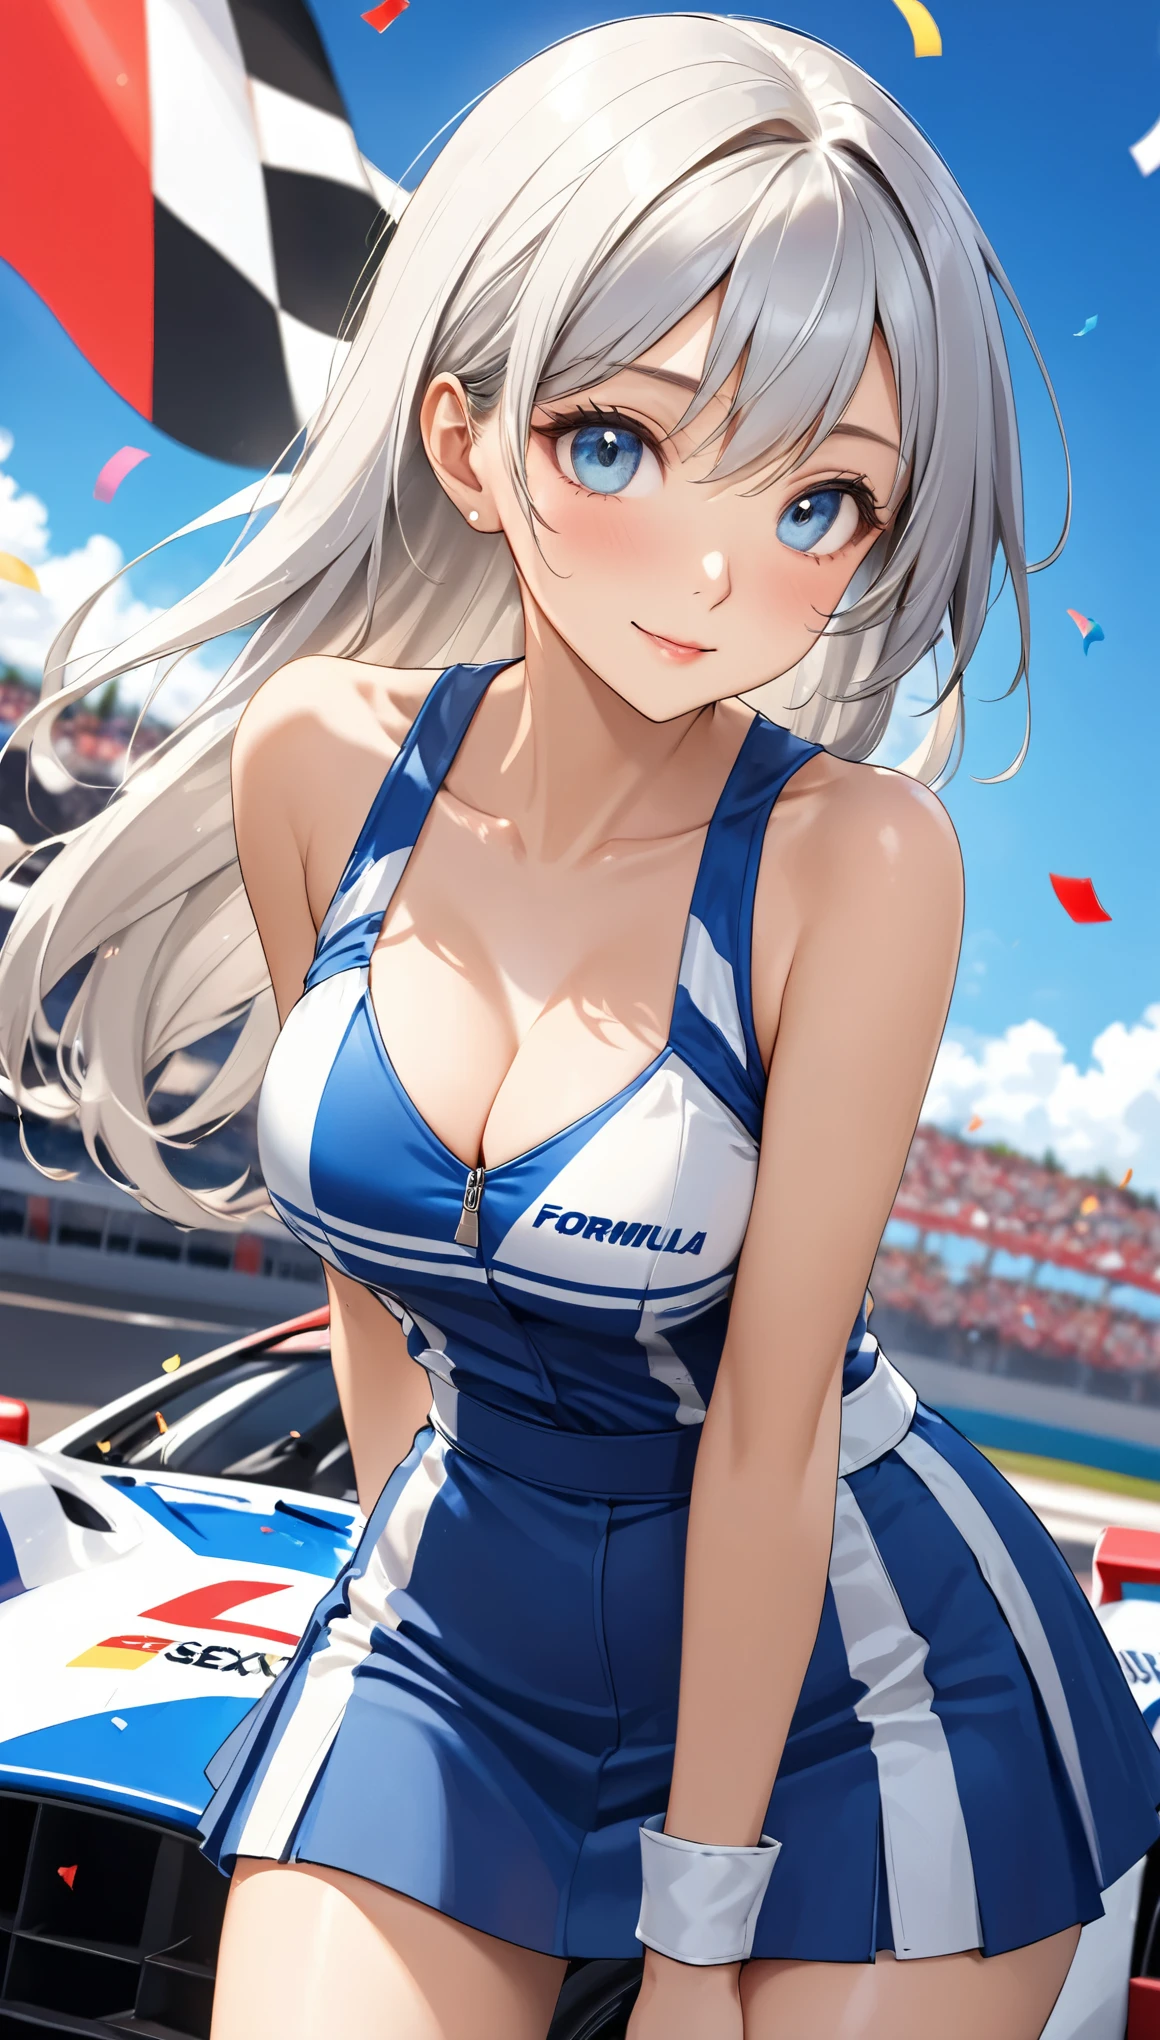 Highest quality, Super quality, 16K, Incredibly absurd, Very detailed, 2.5D, delicate and dynamic, blue sky, Confetti, Racing Car, Checkered Flag, Small face, Extremely delicate facial expression, Delicate eye depiction, Upper body close-up, sole sexy lady, healthy shaped body, 22 years old lady, Race Queen, 170cm tall, big firm bouncing busts, white silver long hair, sexy long legs, Flashy Race Queen costume, blue long skirt, white leather long boots, Formula 1, Auto Racing Track